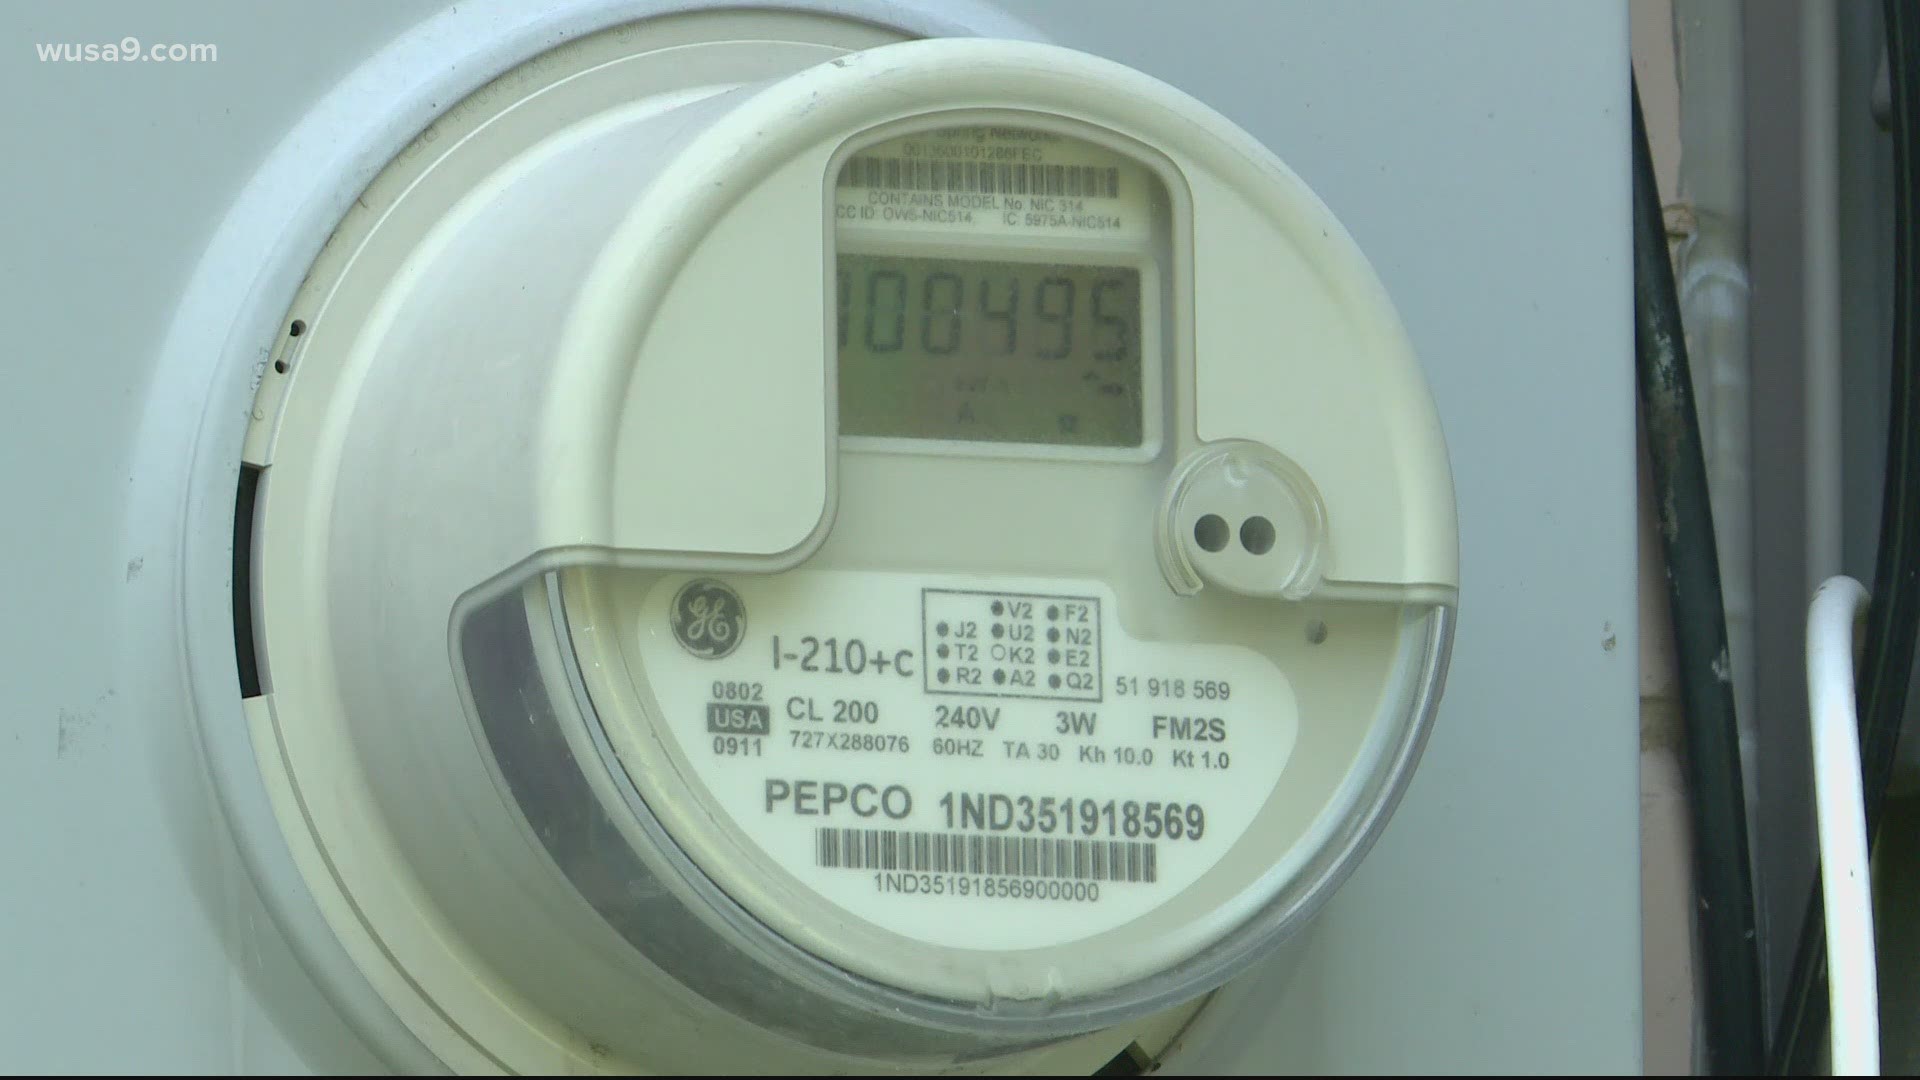 PEPCO says even small moves with your thermostat can achieve significant savings during extreme weather events.